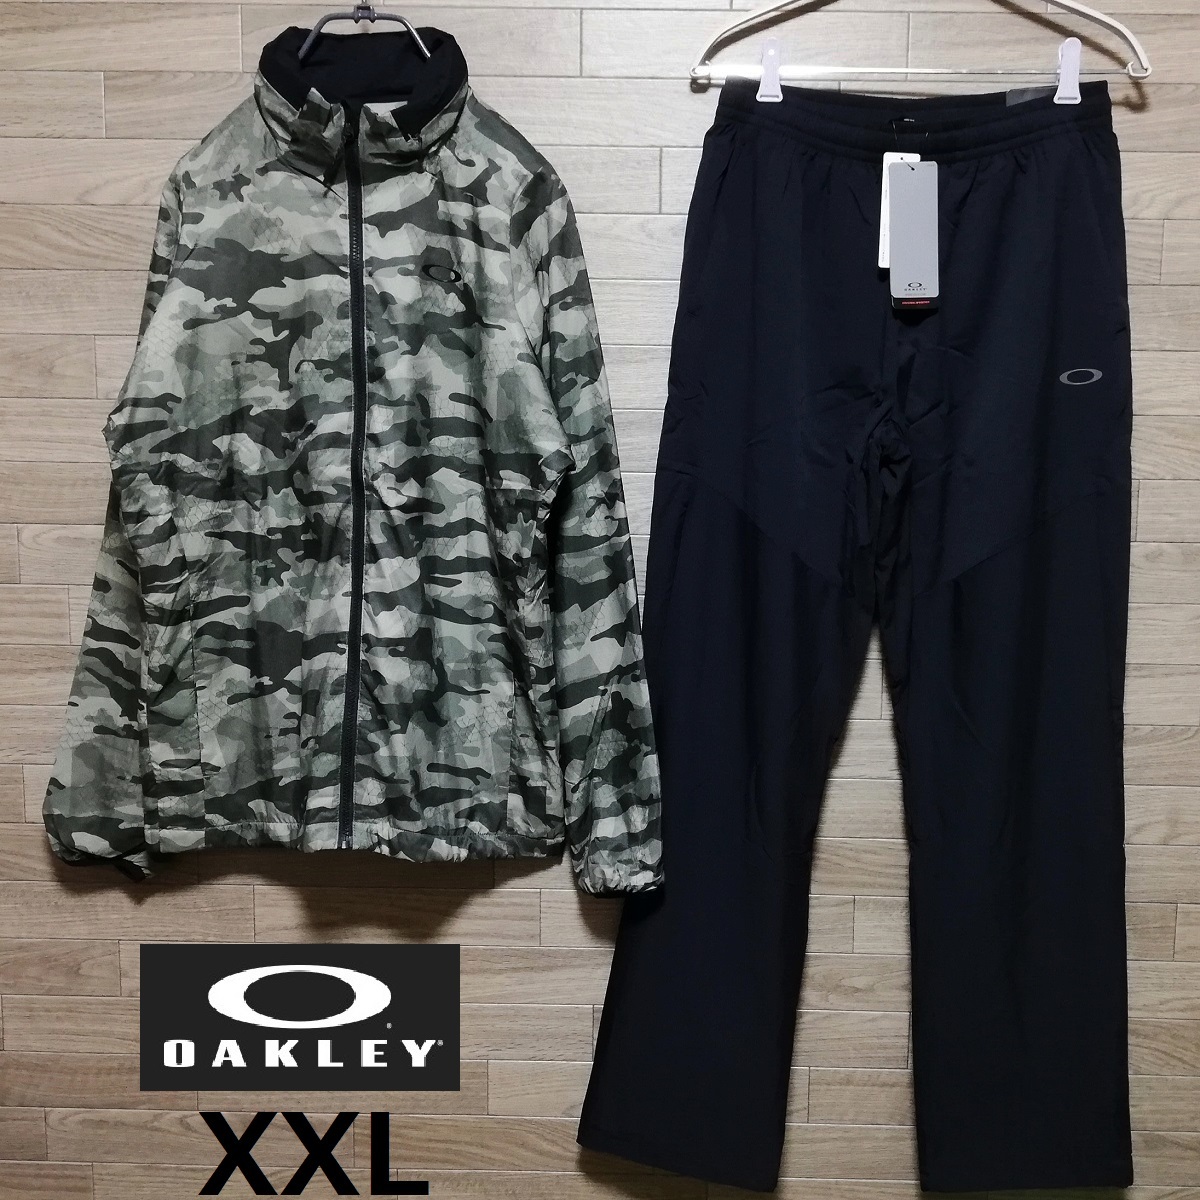 2XL 新品 OAKLEY オークリー 迷彩 グラフィック カモ ウインド ジャケット パンツ 上下 セット XXL 緑 未使用 撥水 防風 保温  秋冬 ゴルフ product details Proxy bidding and ordering service for auctions  and shopping